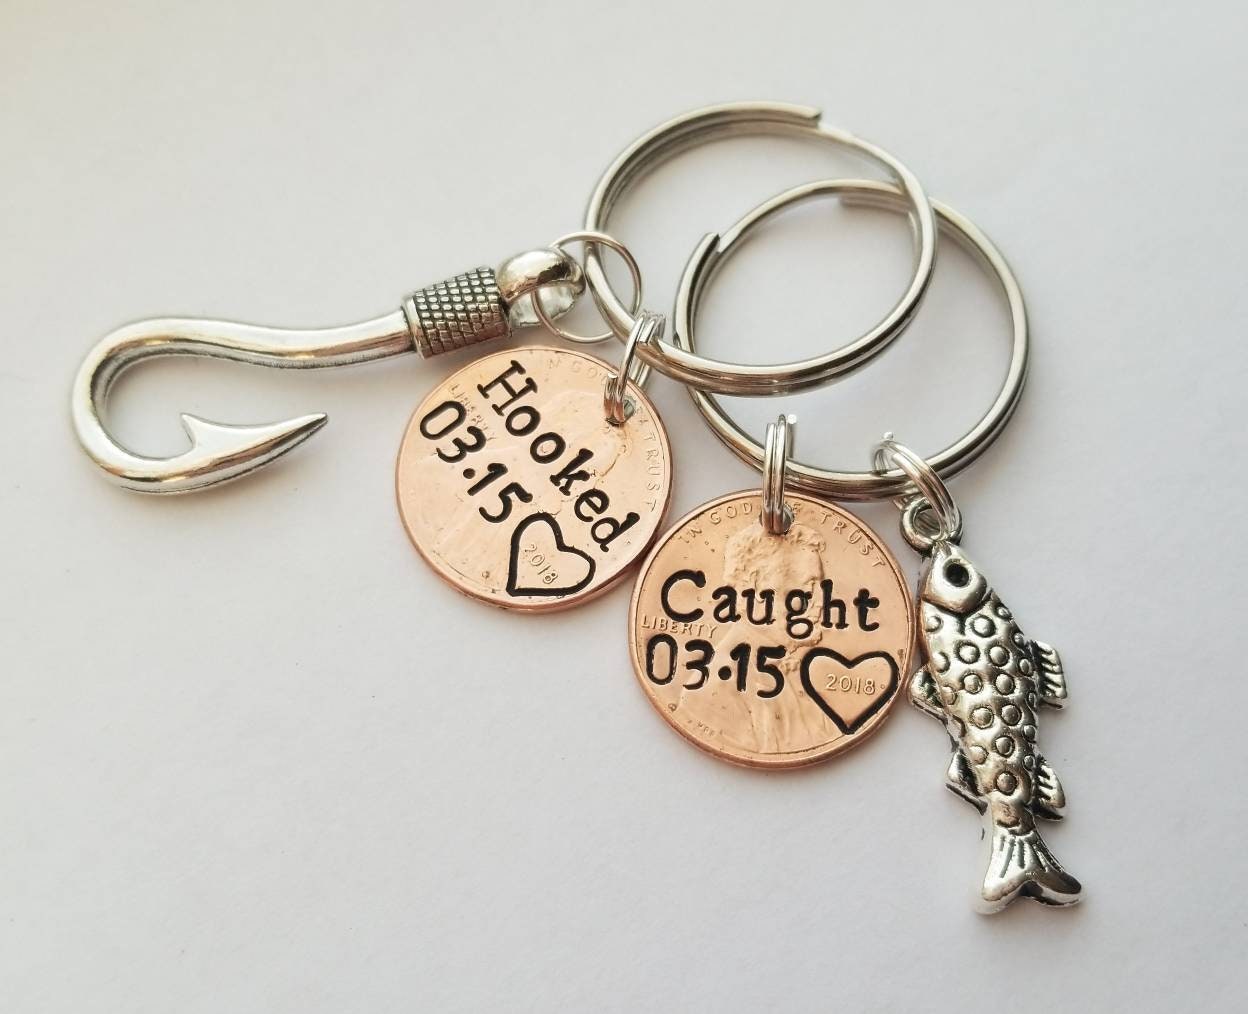 Personalized Penny Keychain, Anniversary Gift for Men, Girlfriend, Boyfriend, Husband, Him, Her, 7 Year Copper, Wife, Couples Christmas